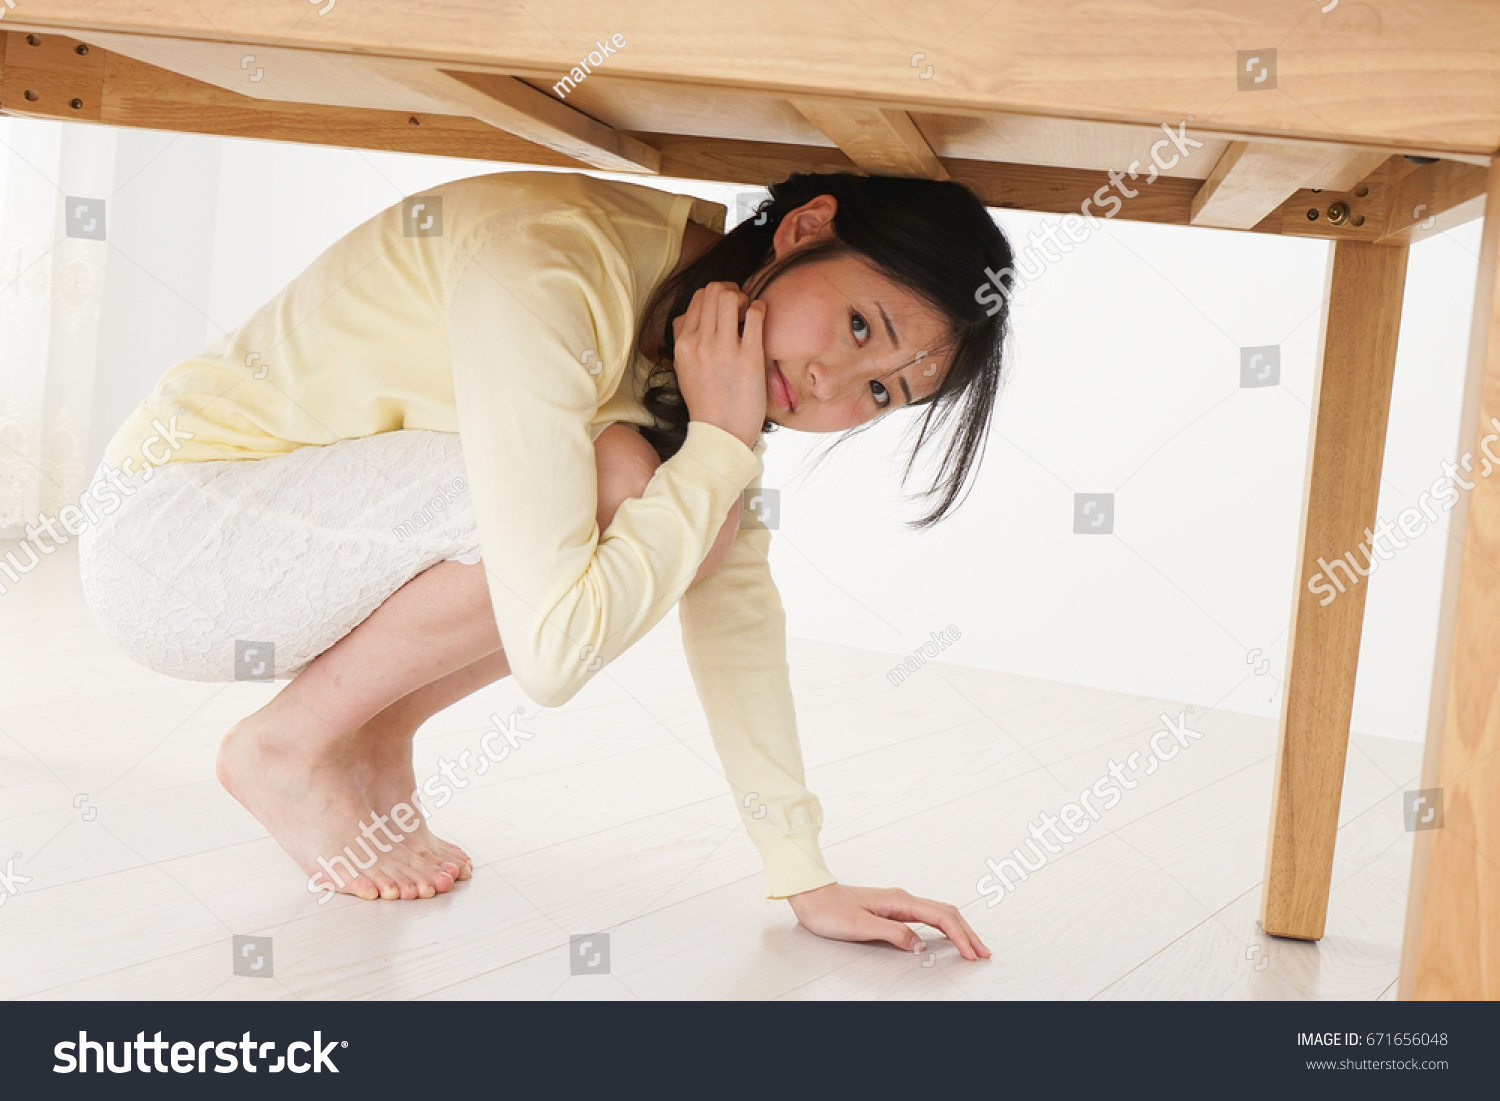 stock-photo-young-woman-hiding-under-table-from-earthquake-671656048.jpg